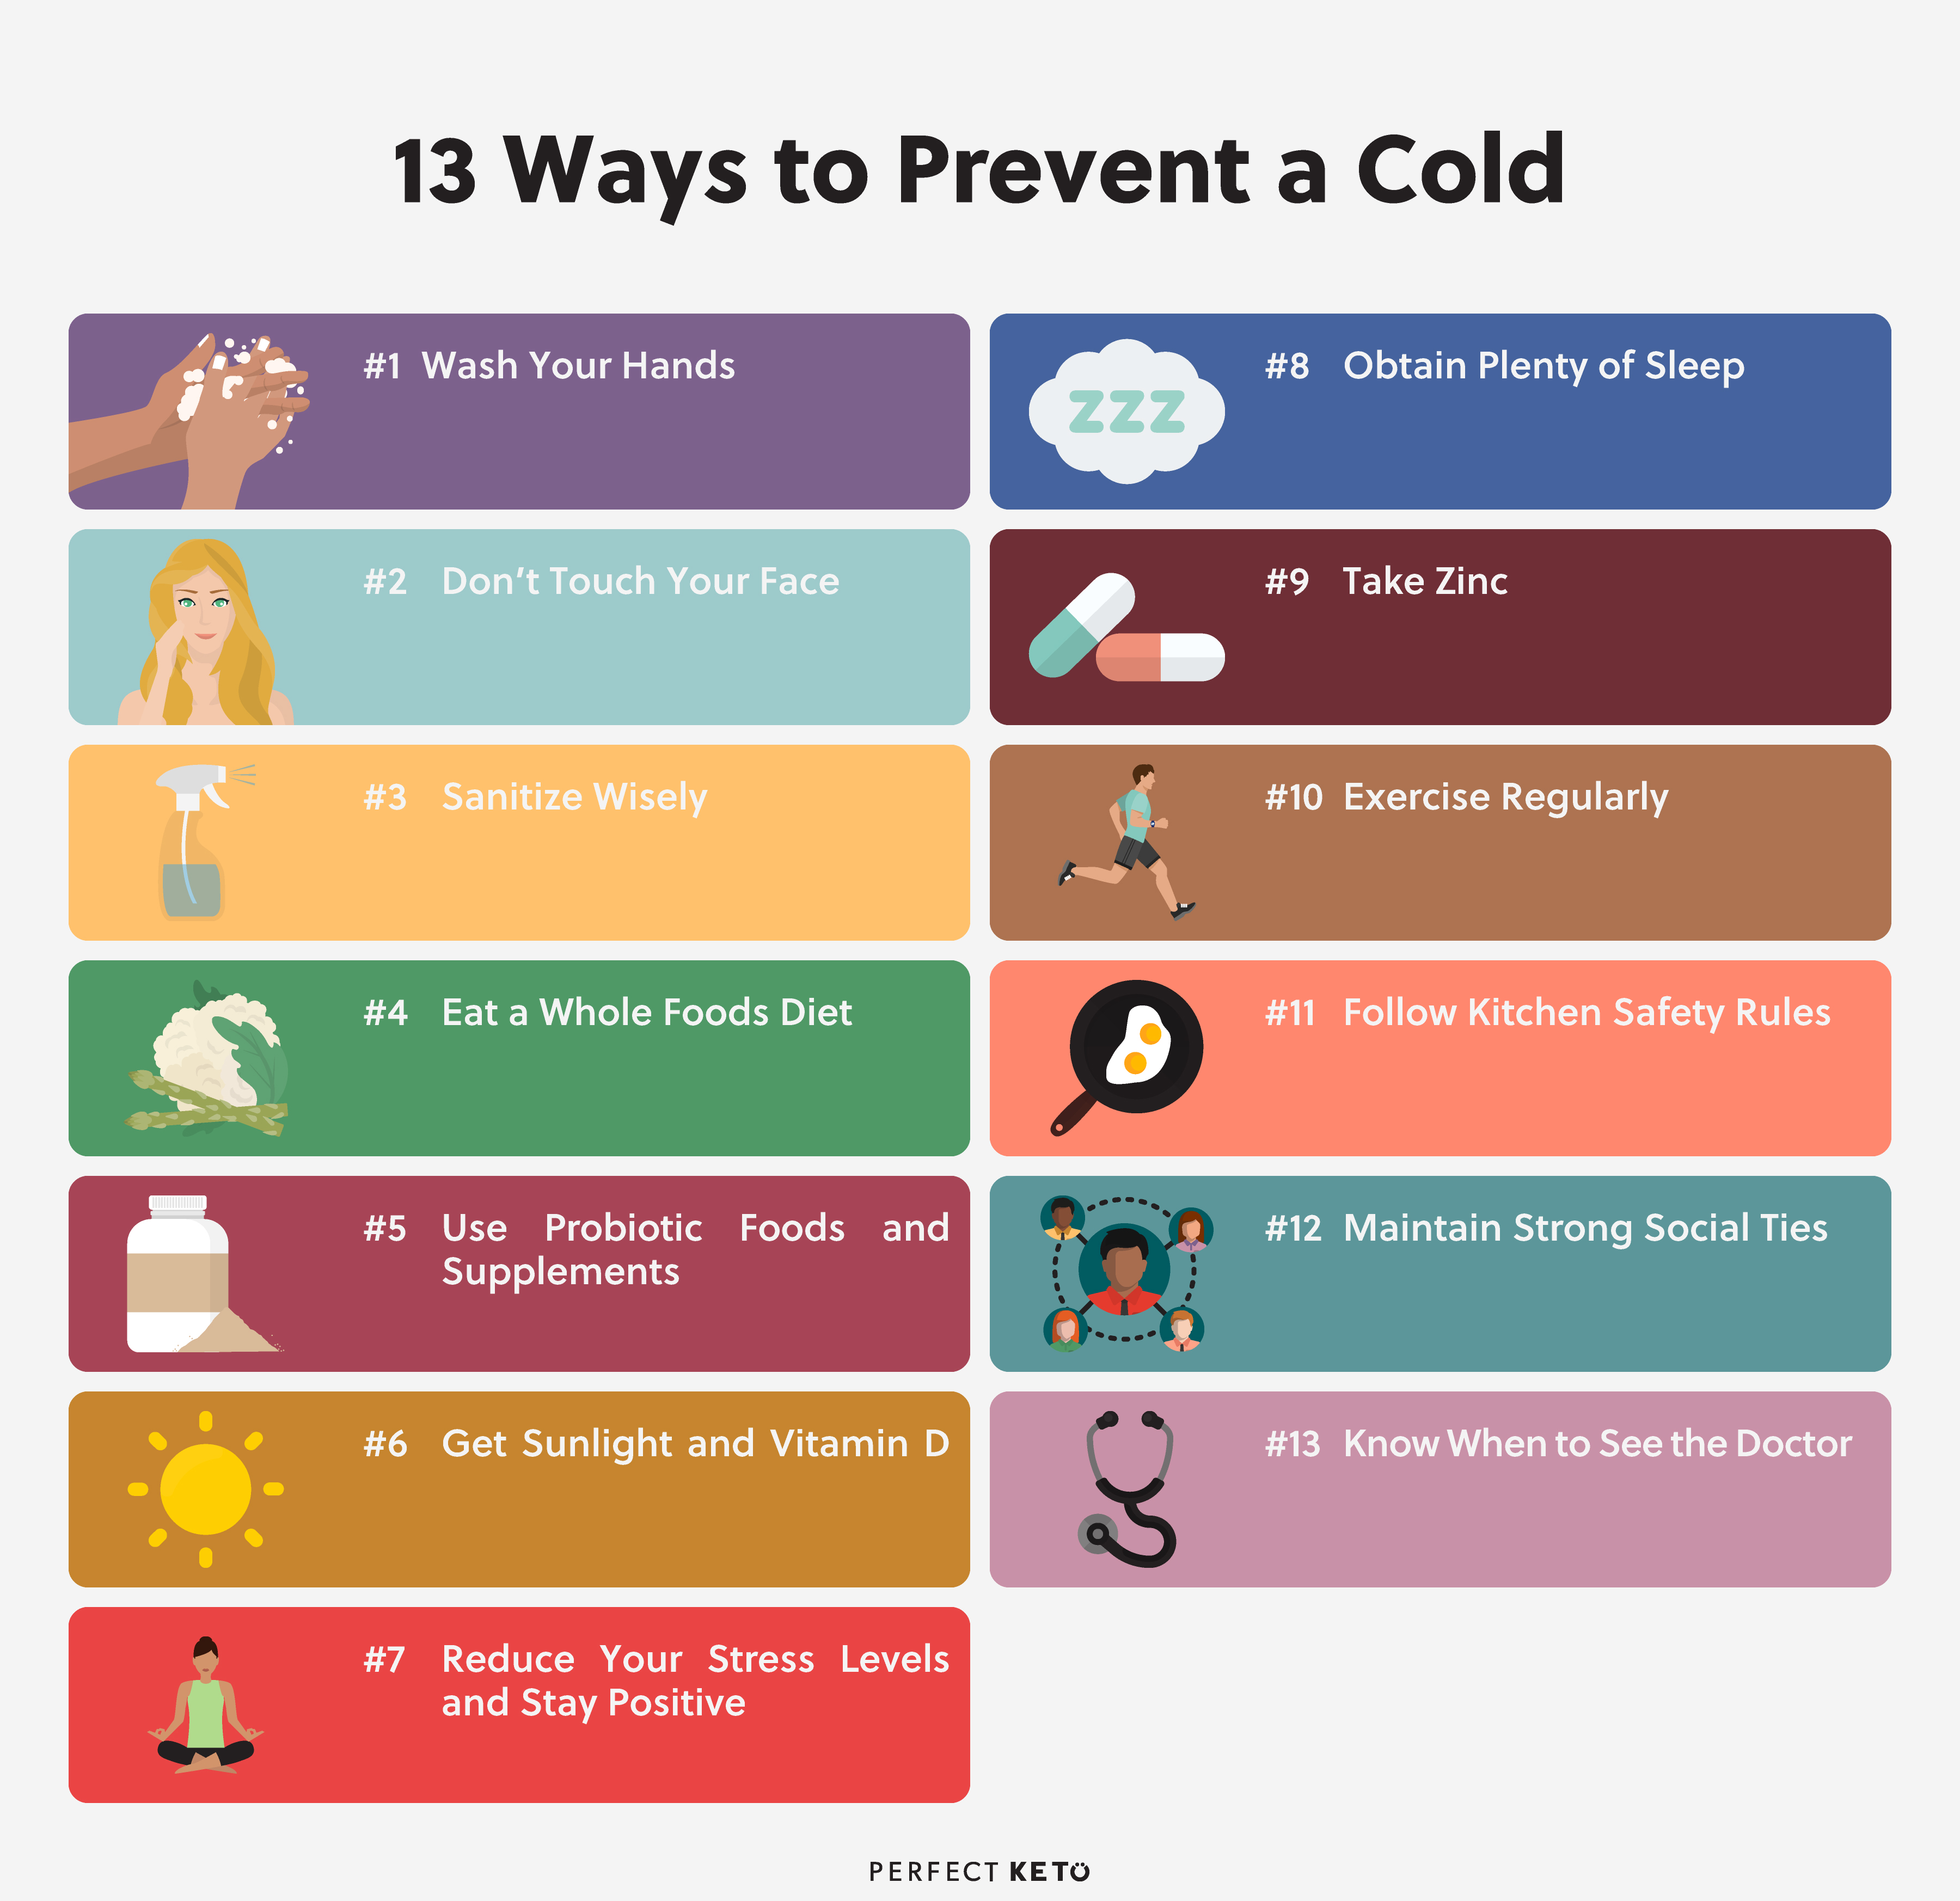 13-Ways-to-Prevent-a-Cold.jpg